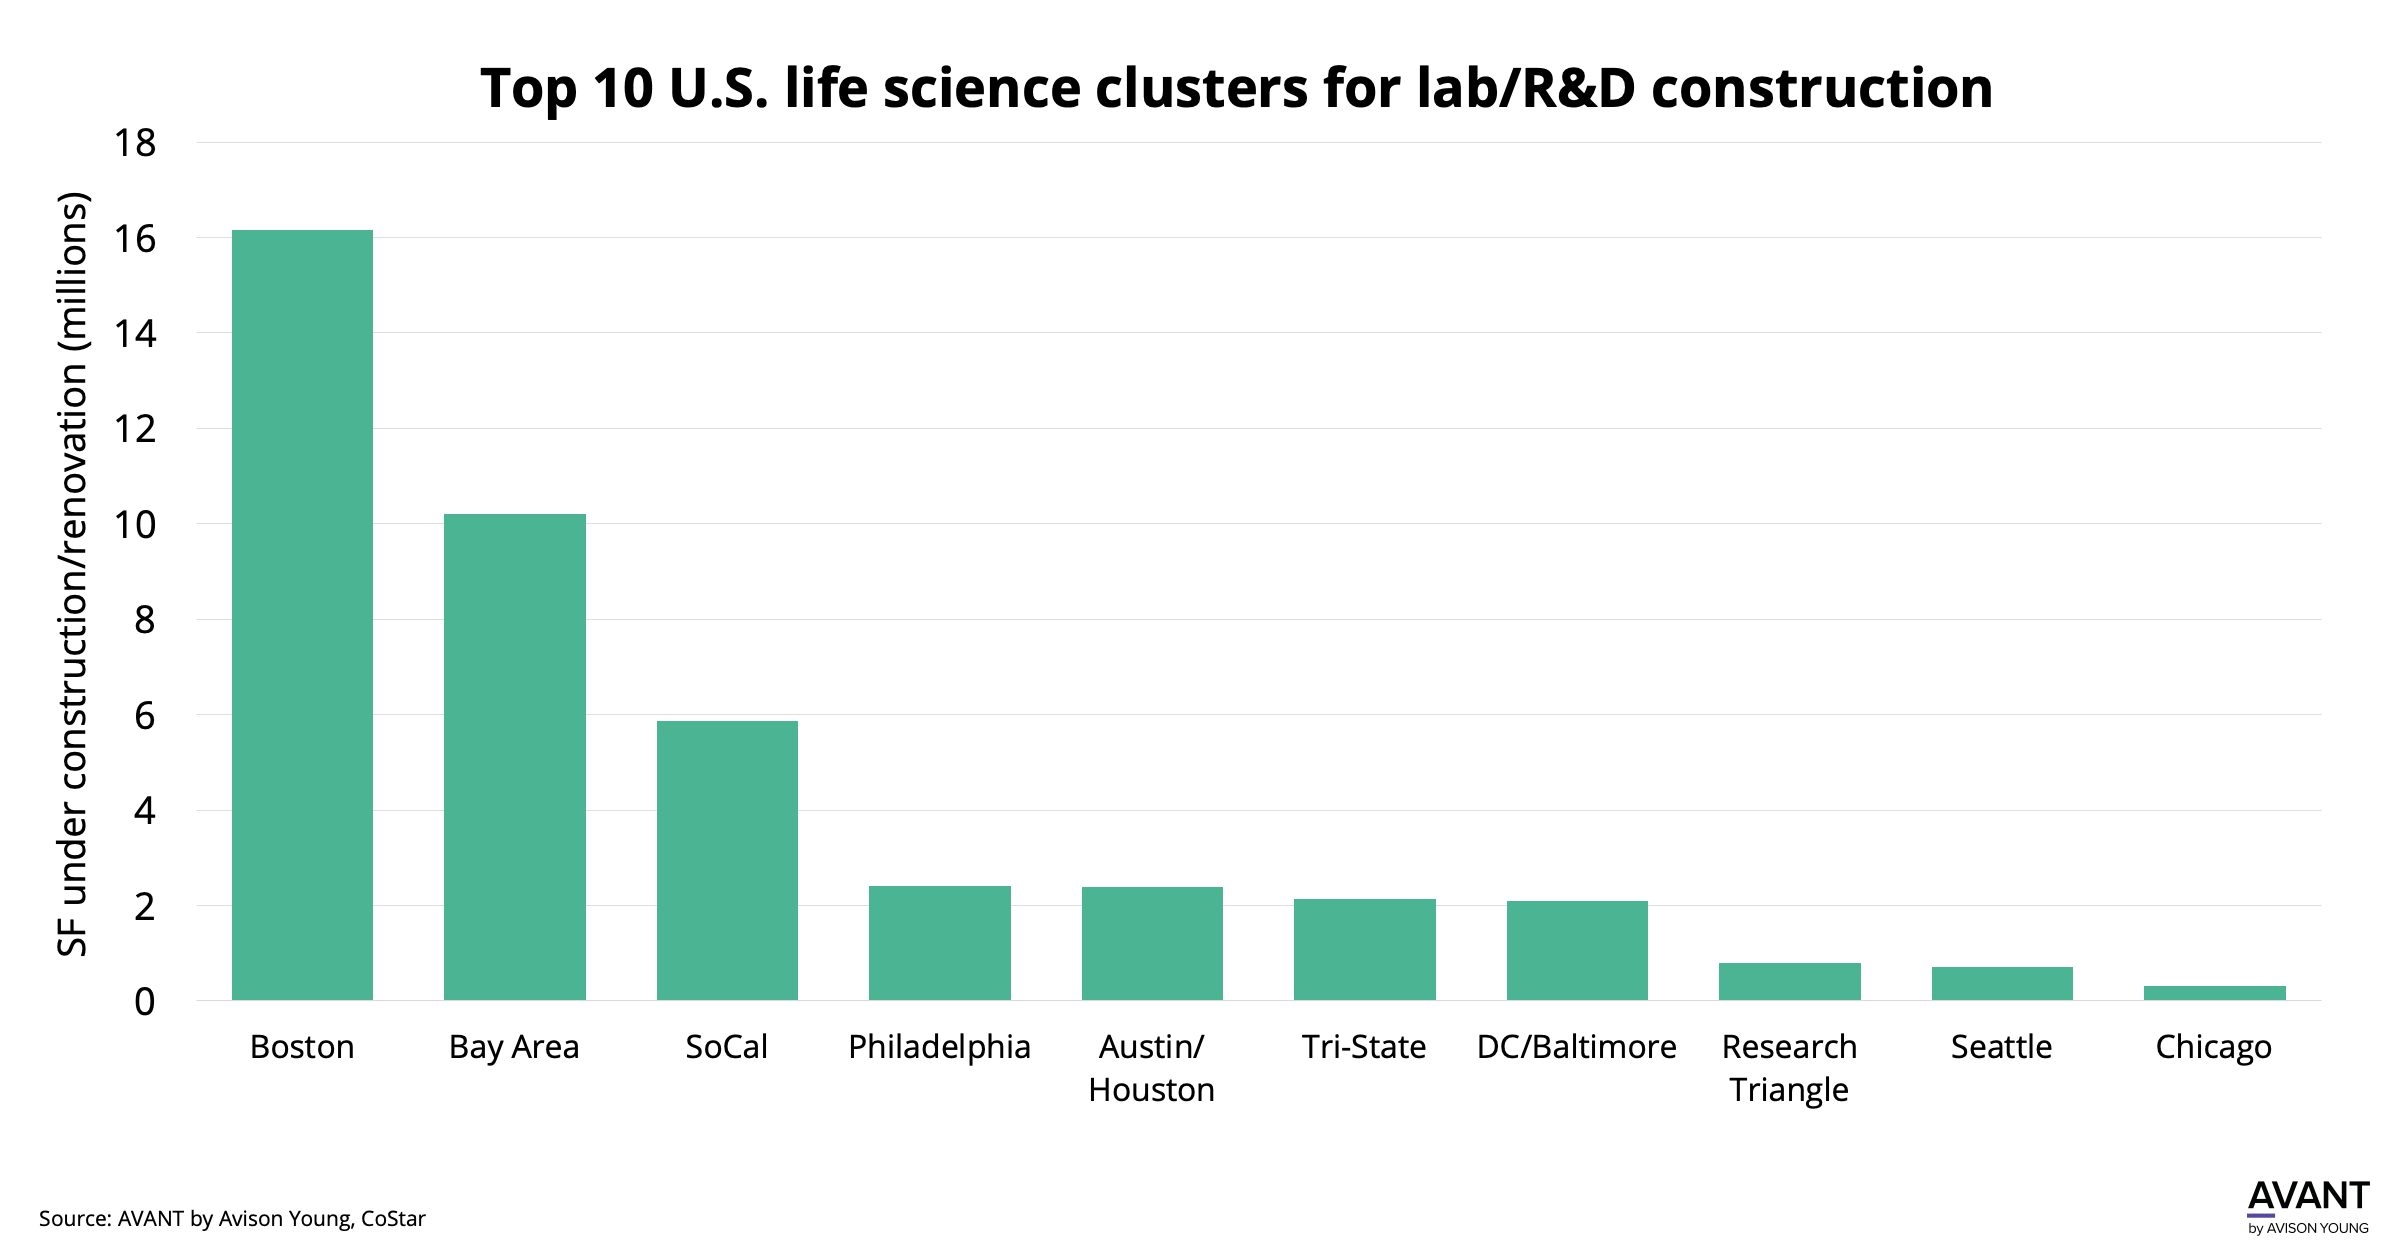 Top 10 US life science clusters for lab / R&D construction